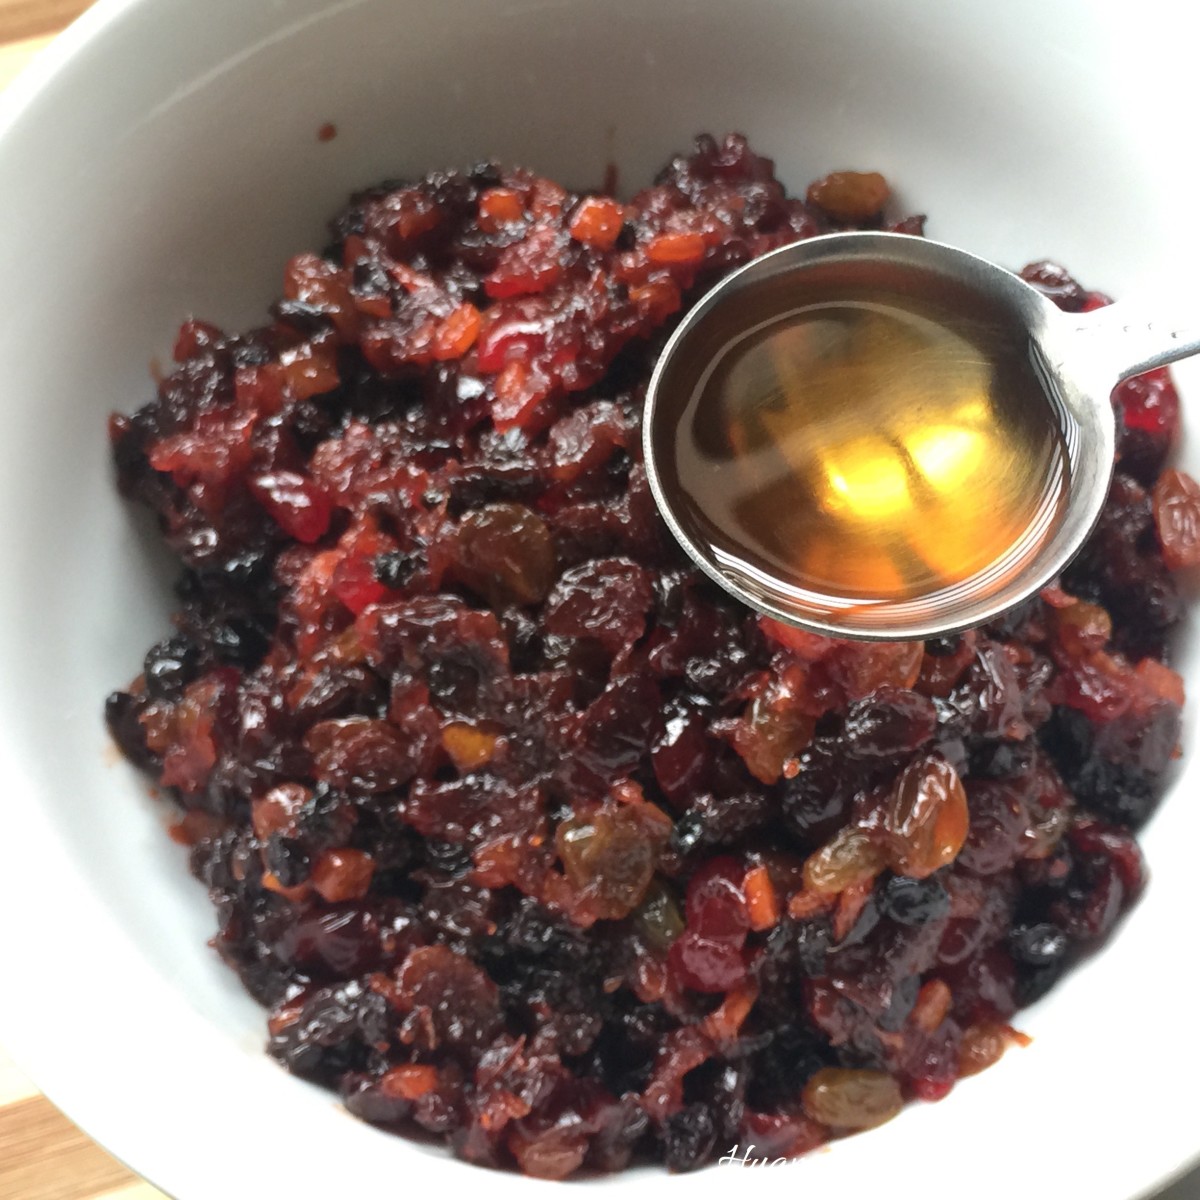 Christmas Fruit Mince Recipe - add more rum